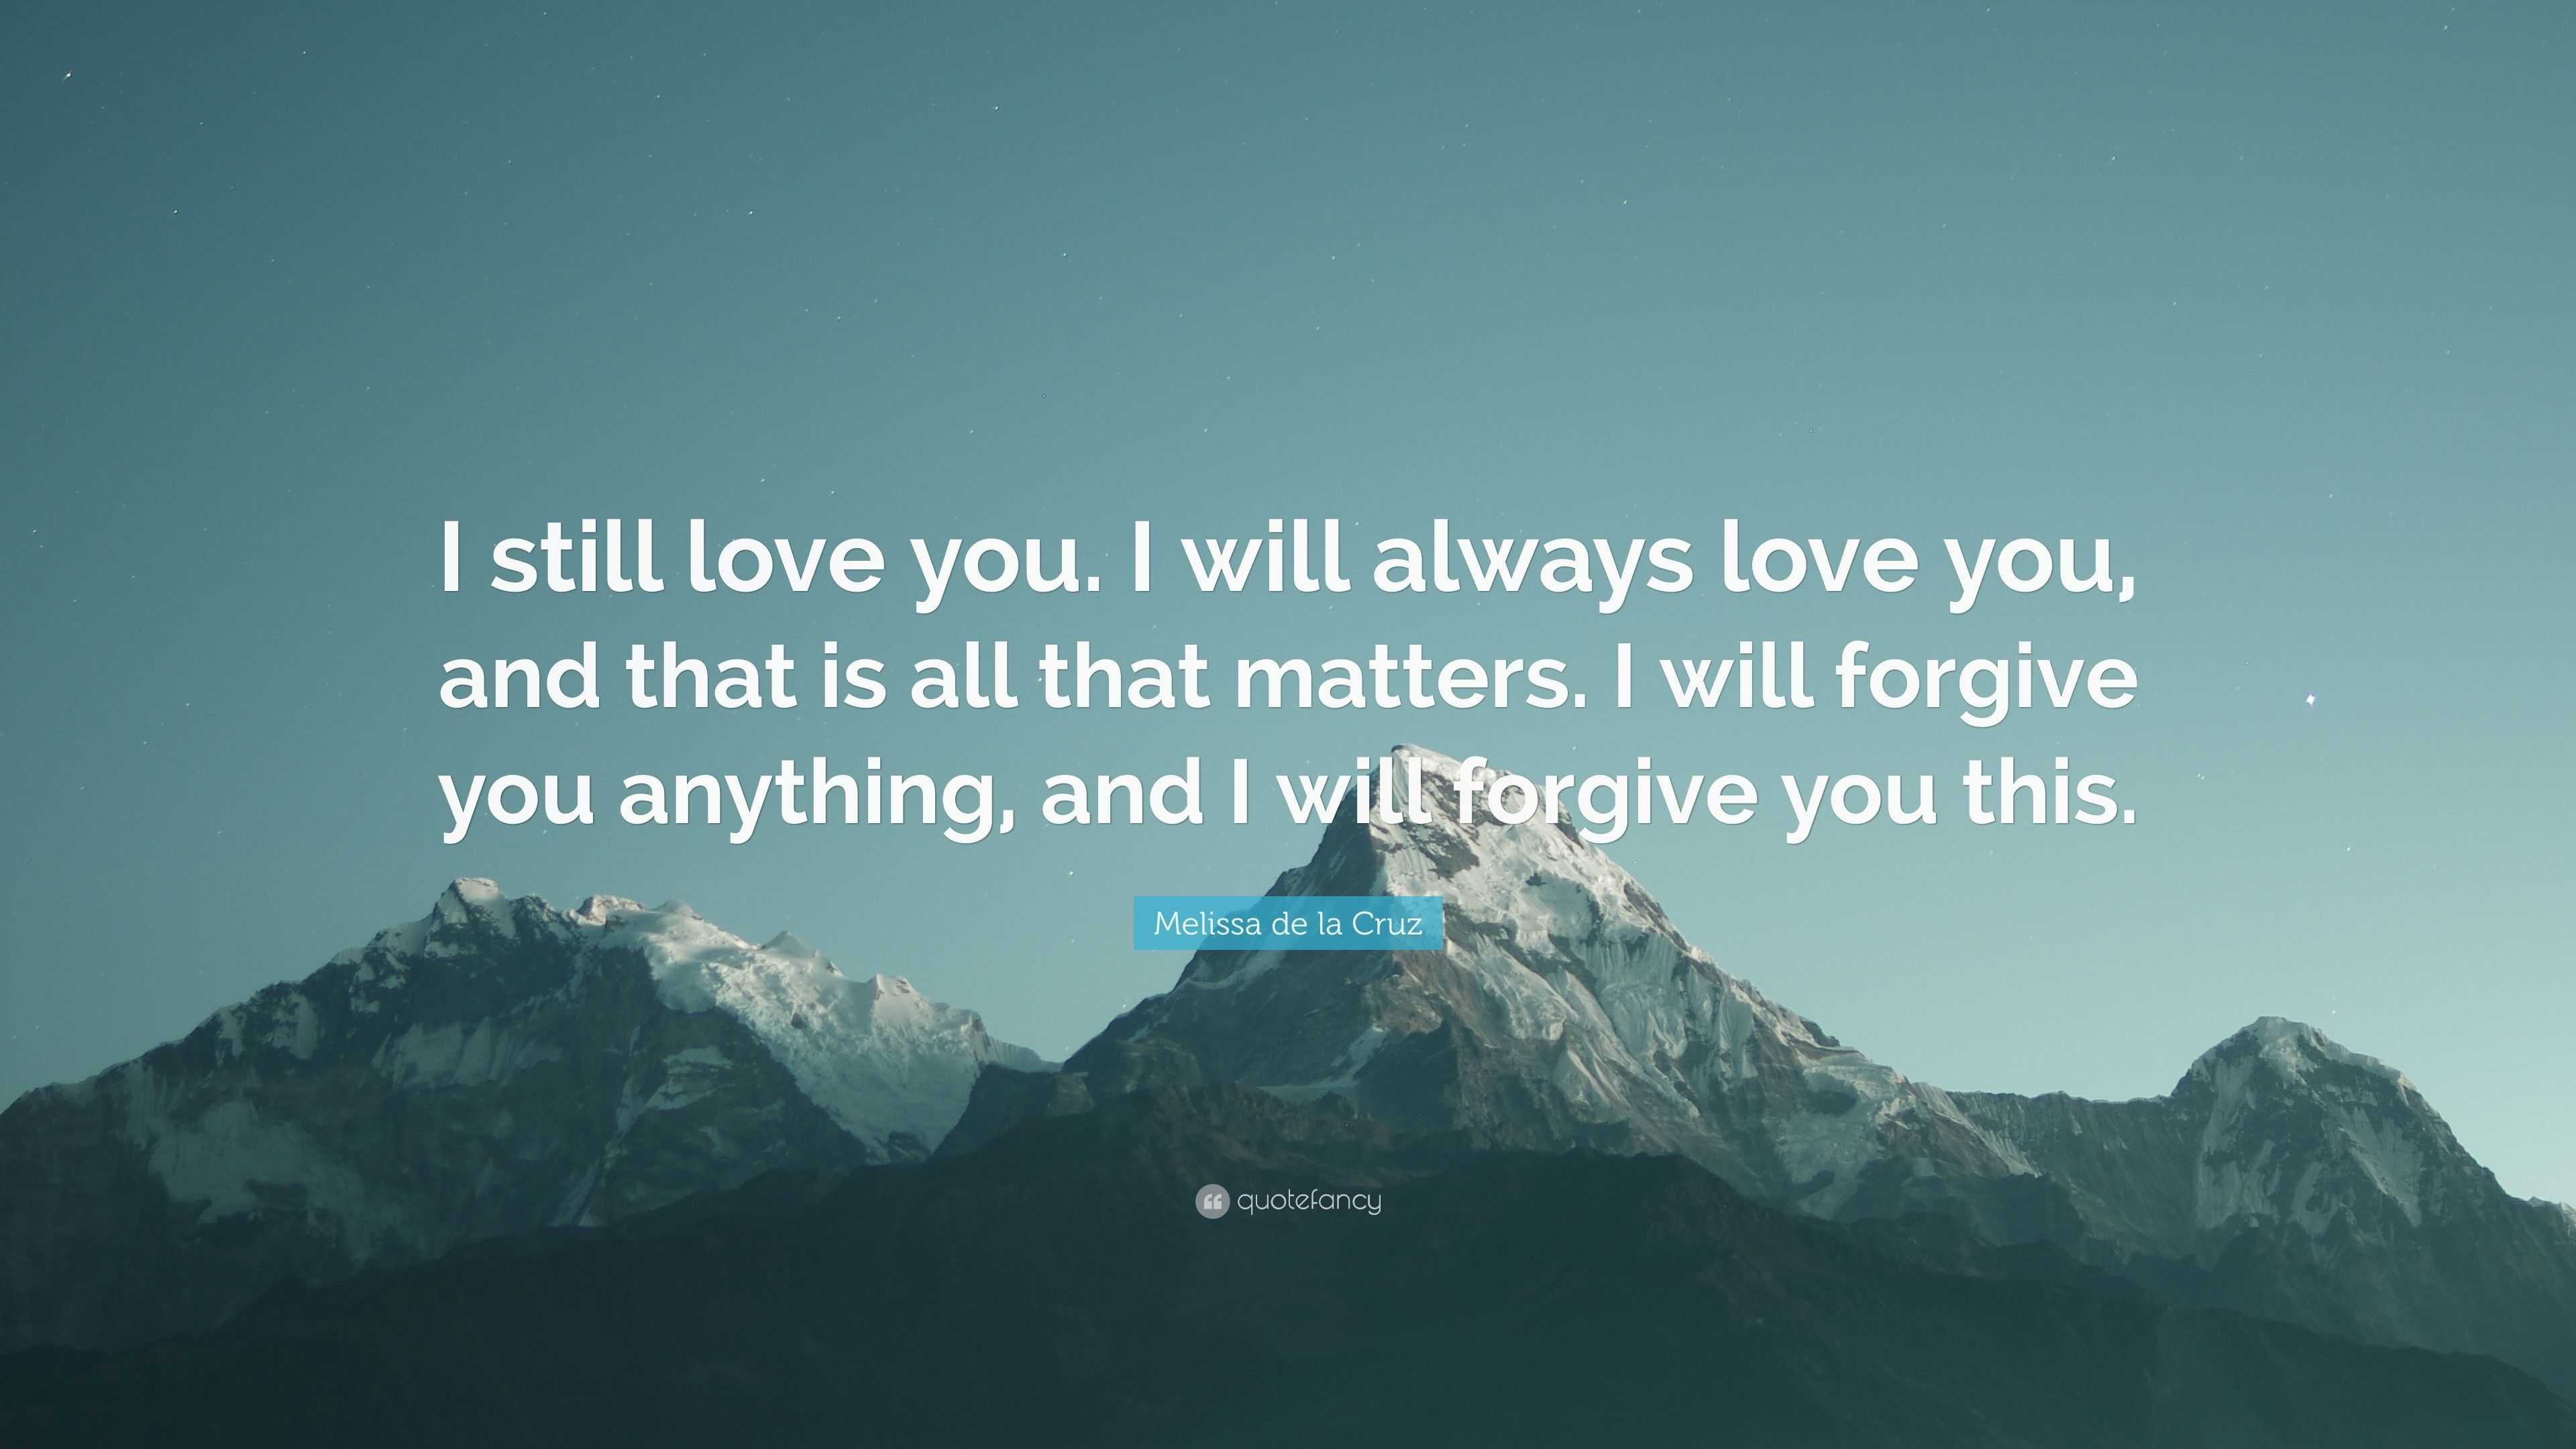 Melissa De La Cruz Quote I Still Love You I Will Always Love You And That Is All That Matters I Will Forgive You Anything And I Will Forgive